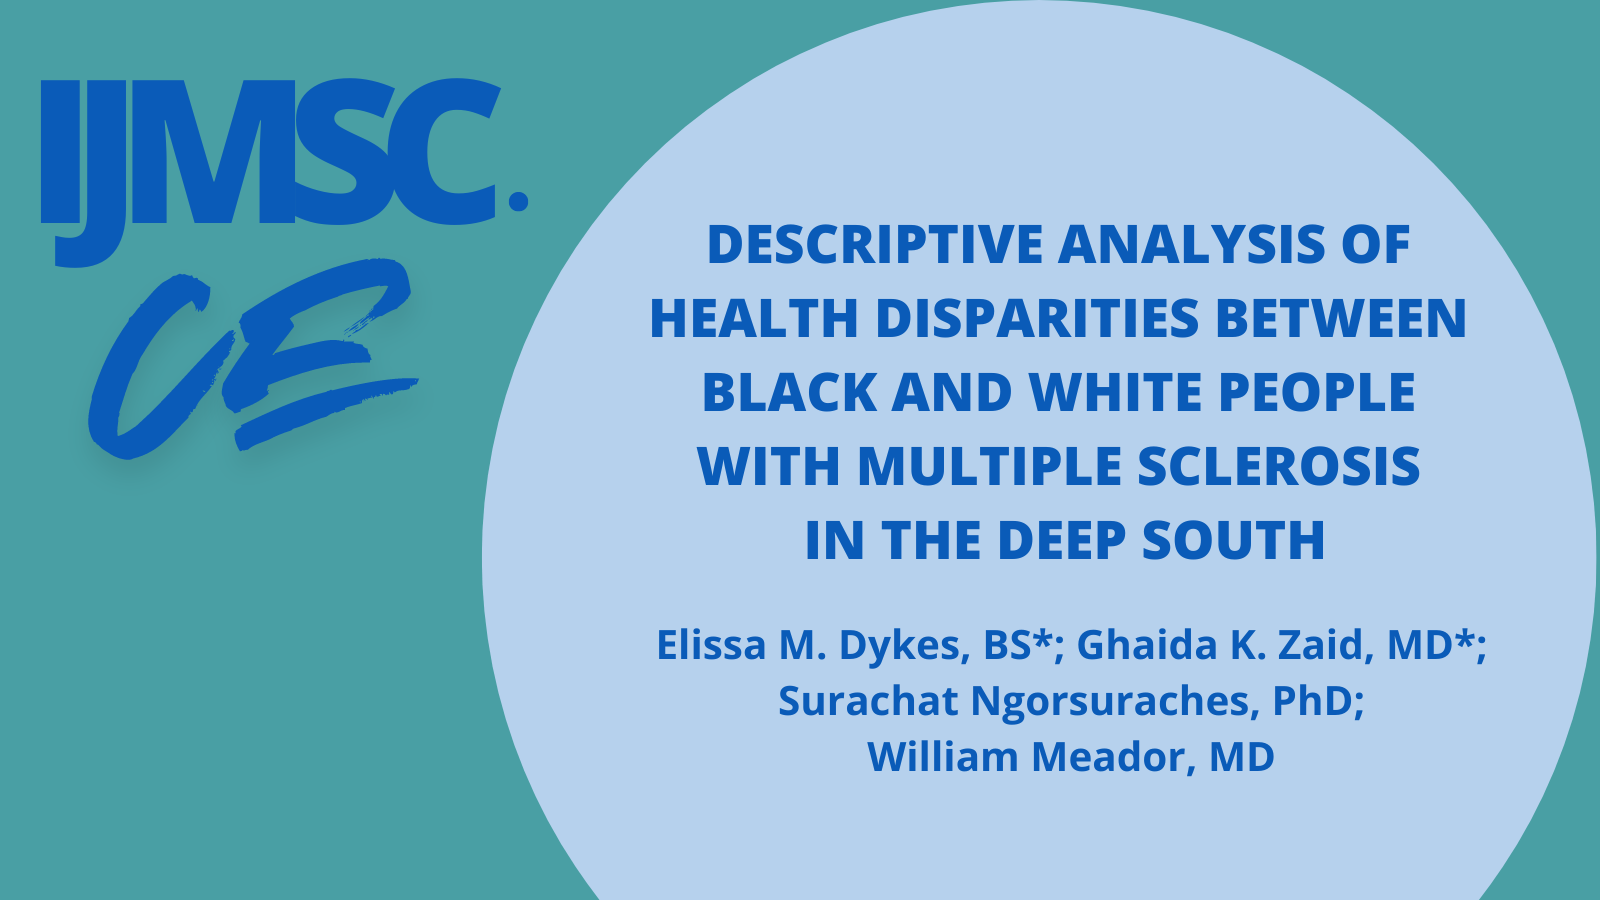 Descriptive Analysis of Health Disparities Between Black and White People With Multiple Sclerosis in the Deep South 